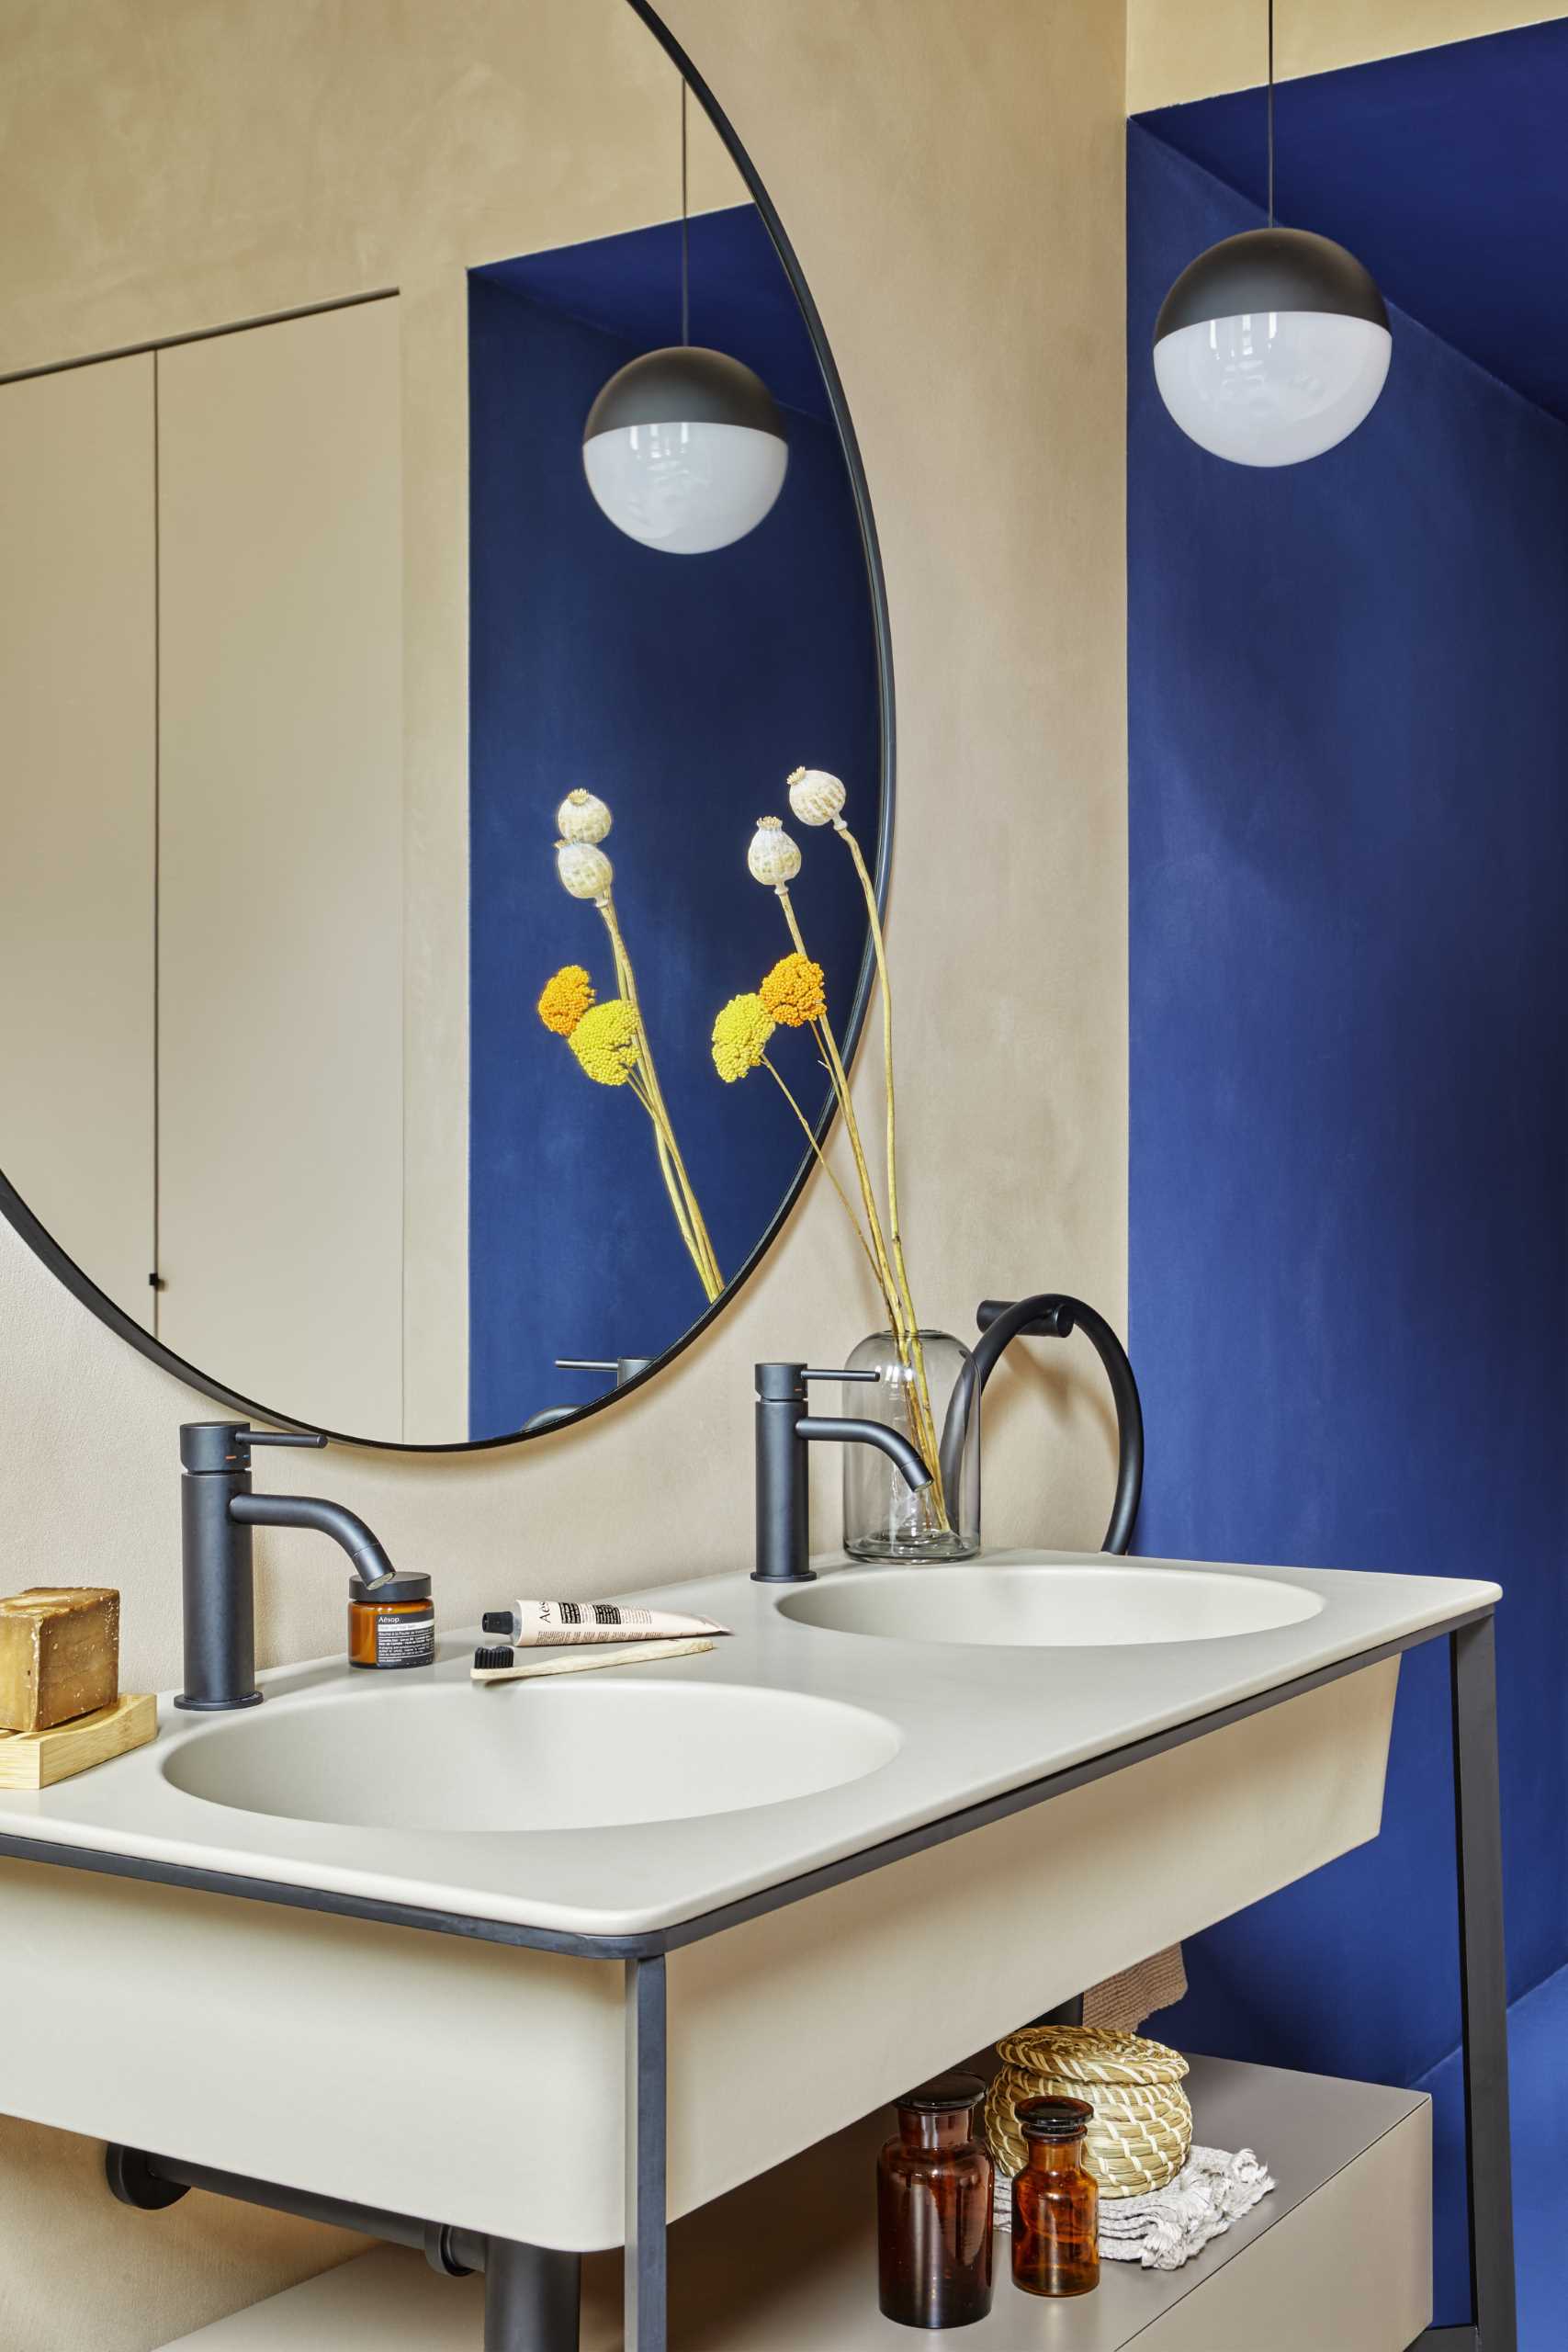 A modern bathroom with a double vanity and blue accent walls.